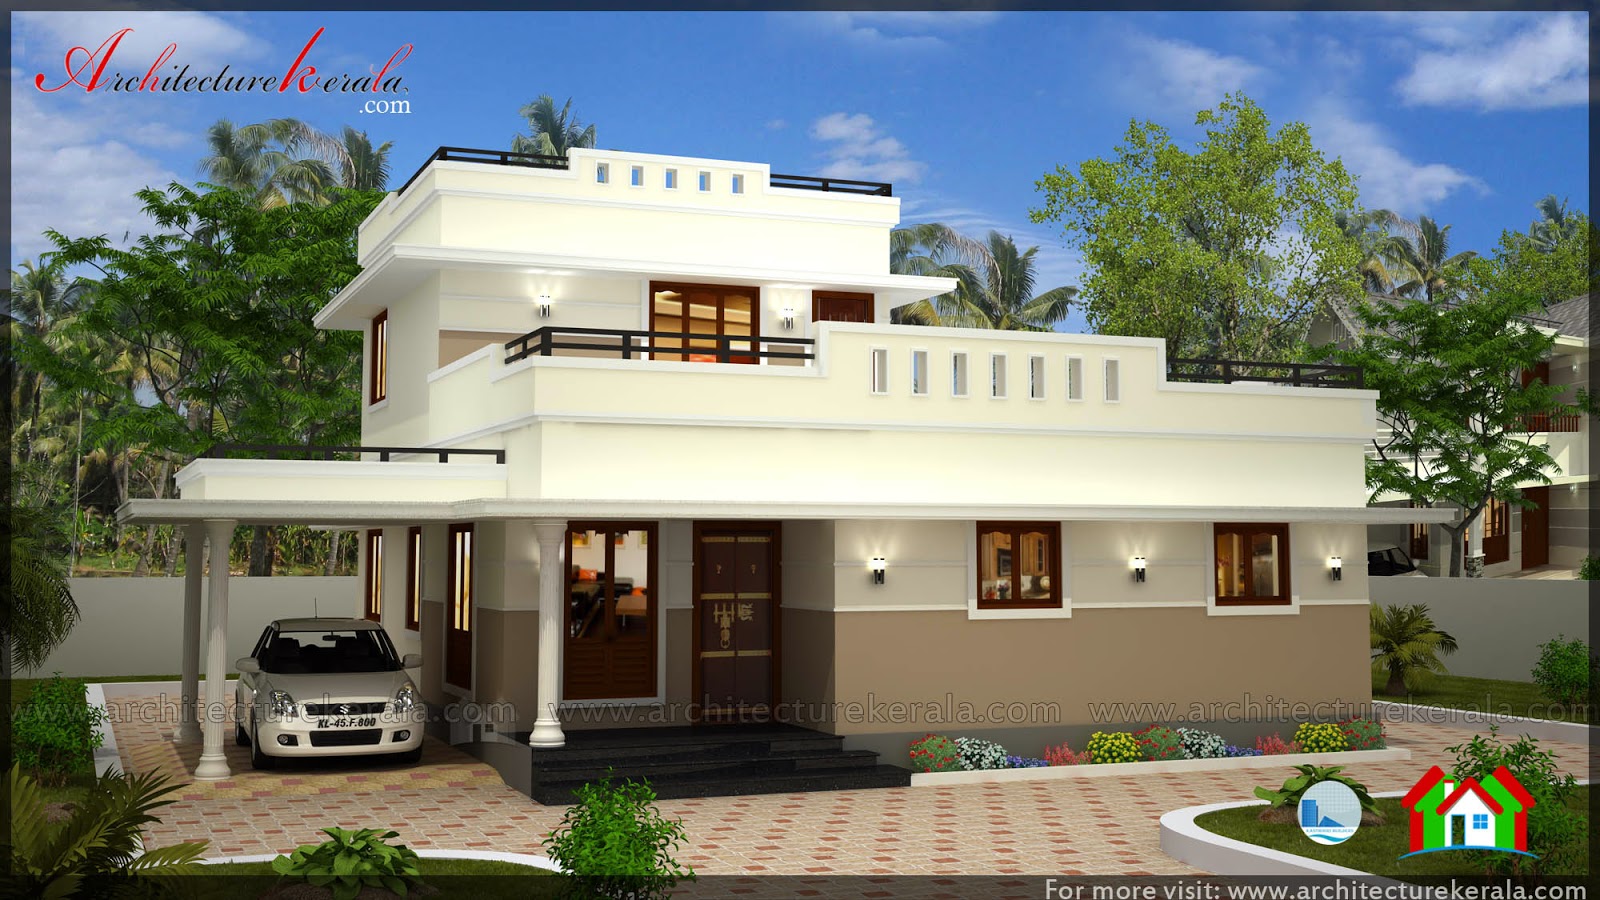 Low Cost 3 Bedroom  Kerala  House  Plan  with Elevation  Free 